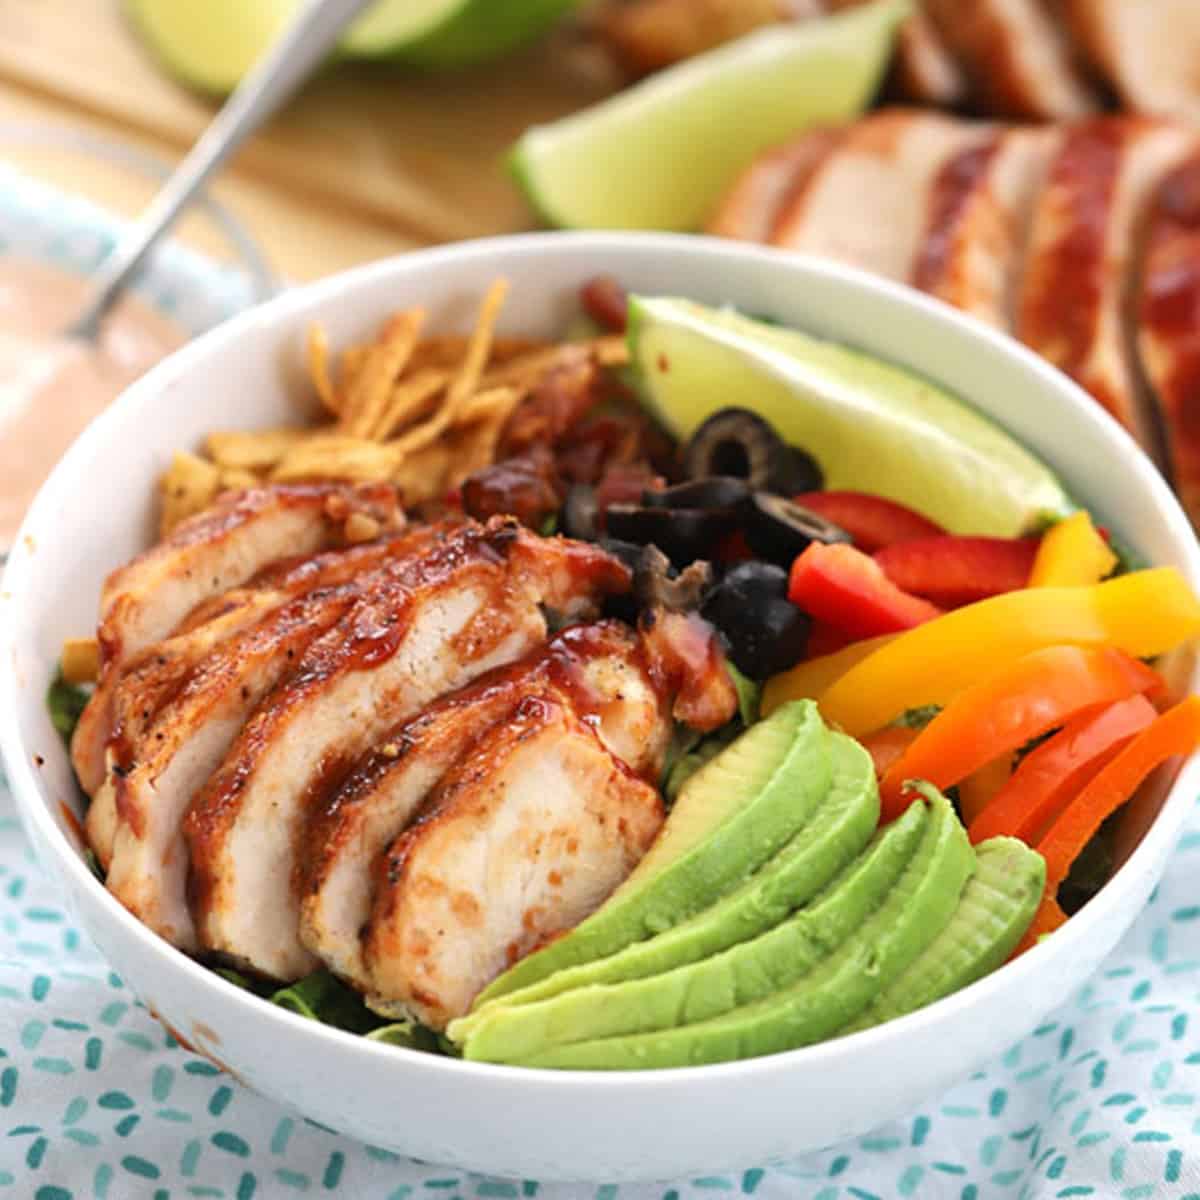 bbq chicken Salad ingredients are grilled chicken, loads of veggies and plenty of tangy BBQ ranch dressing